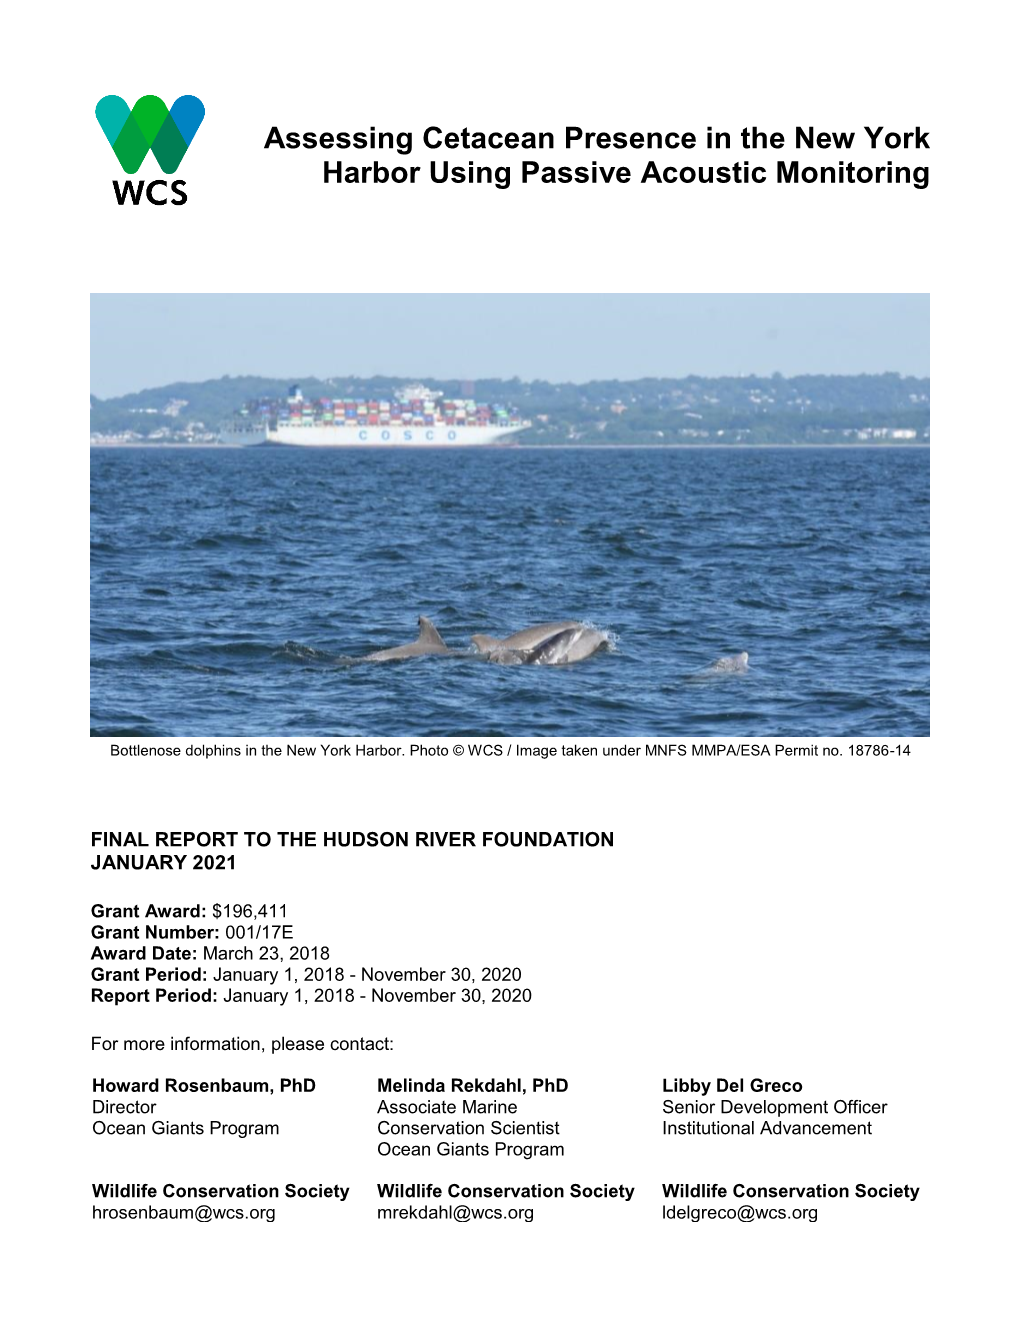 Assessing Cetacean Presence in the New York Harbor Using Passive Acoustic Monitoring